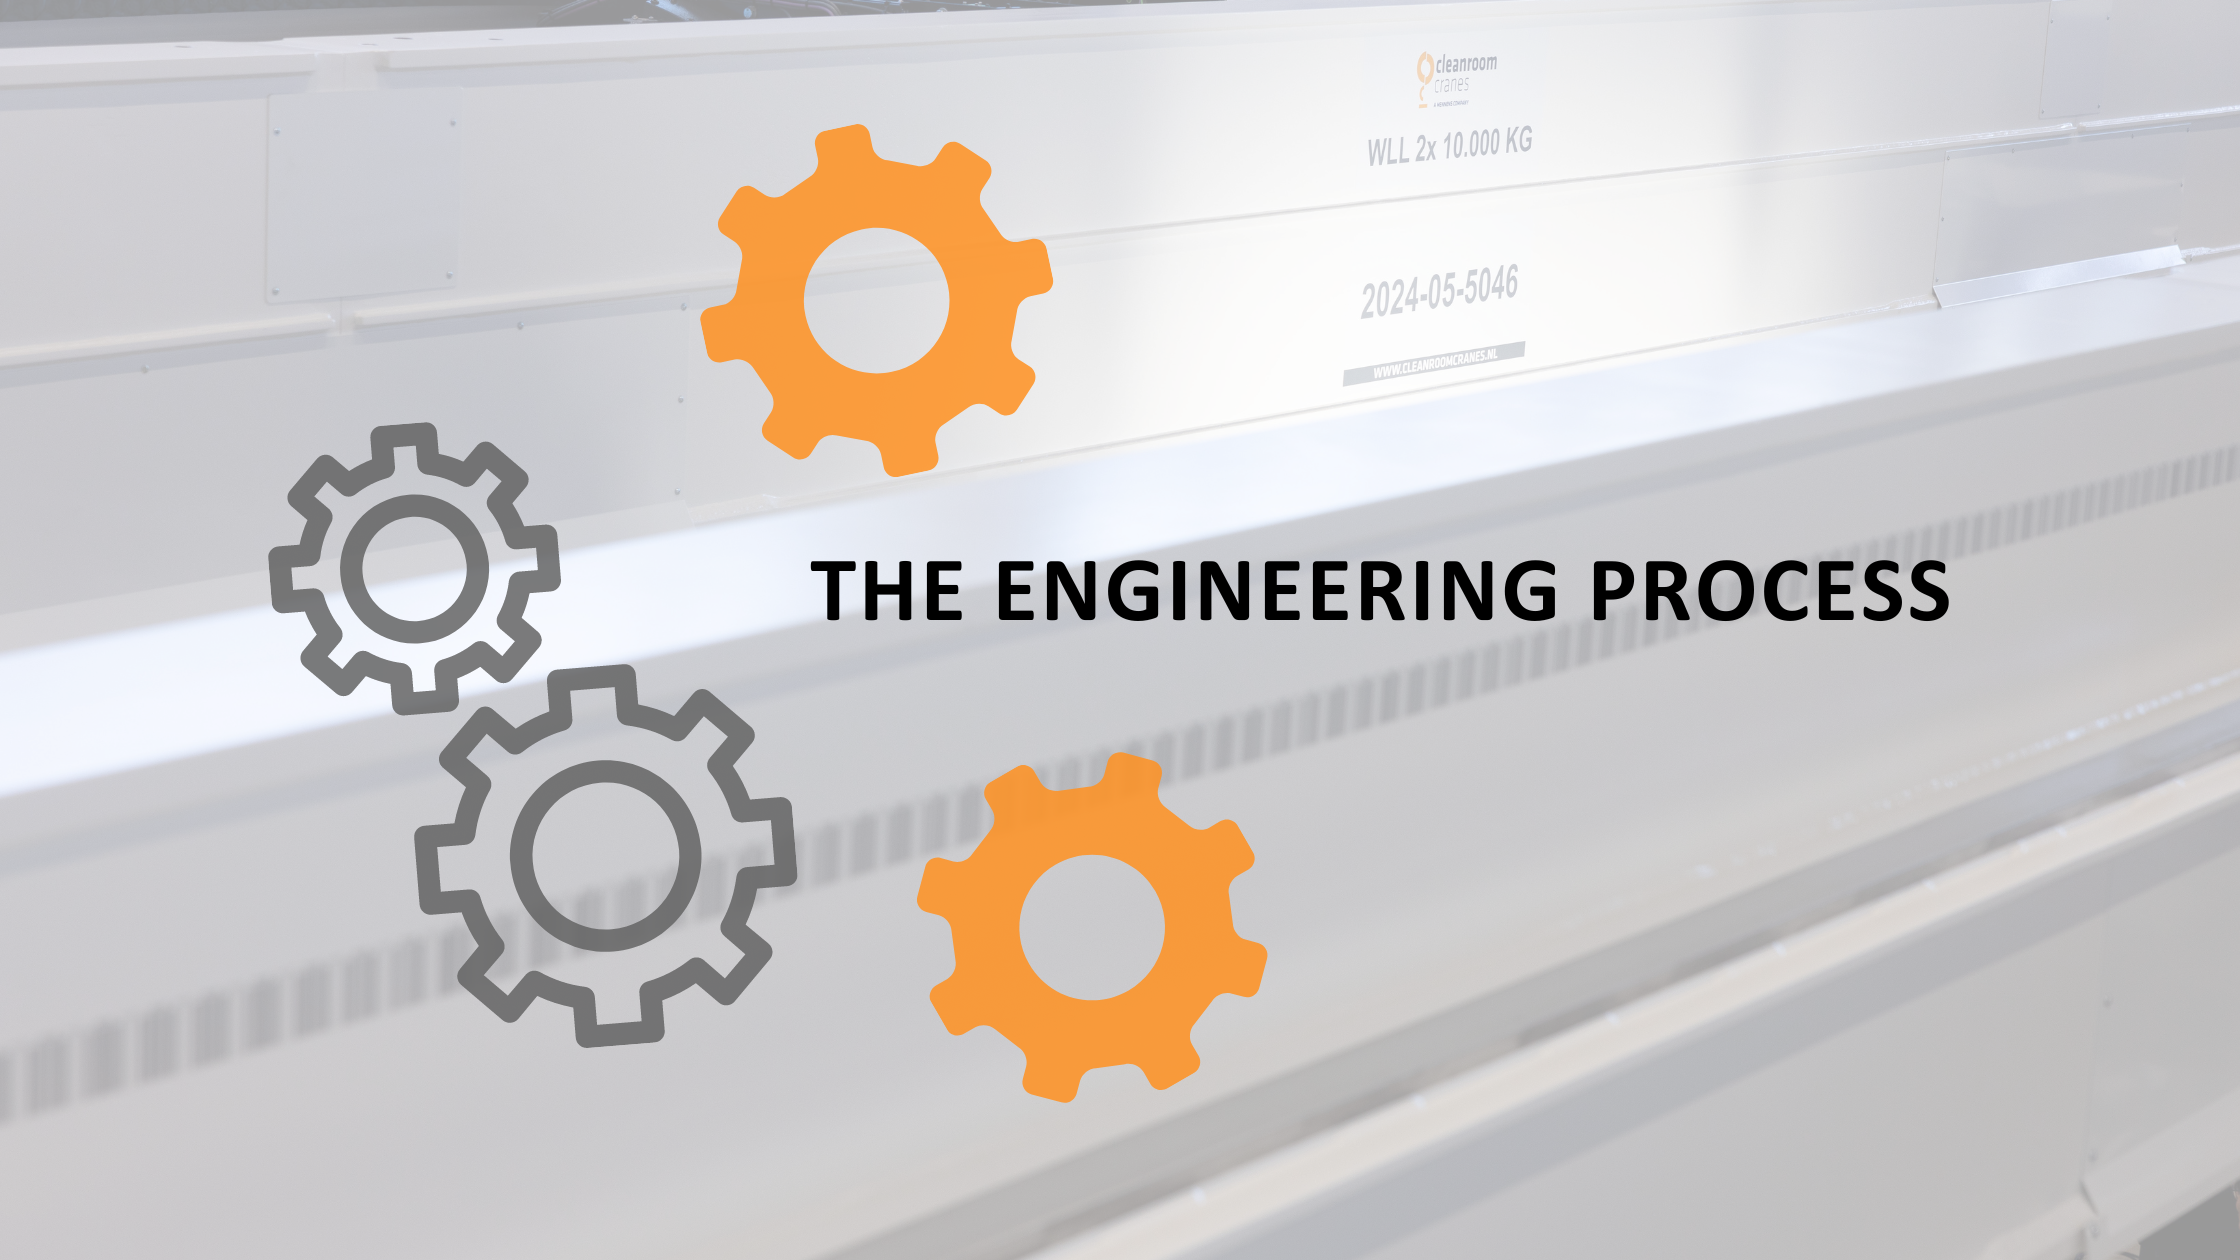 The engineering process. All phases explained.